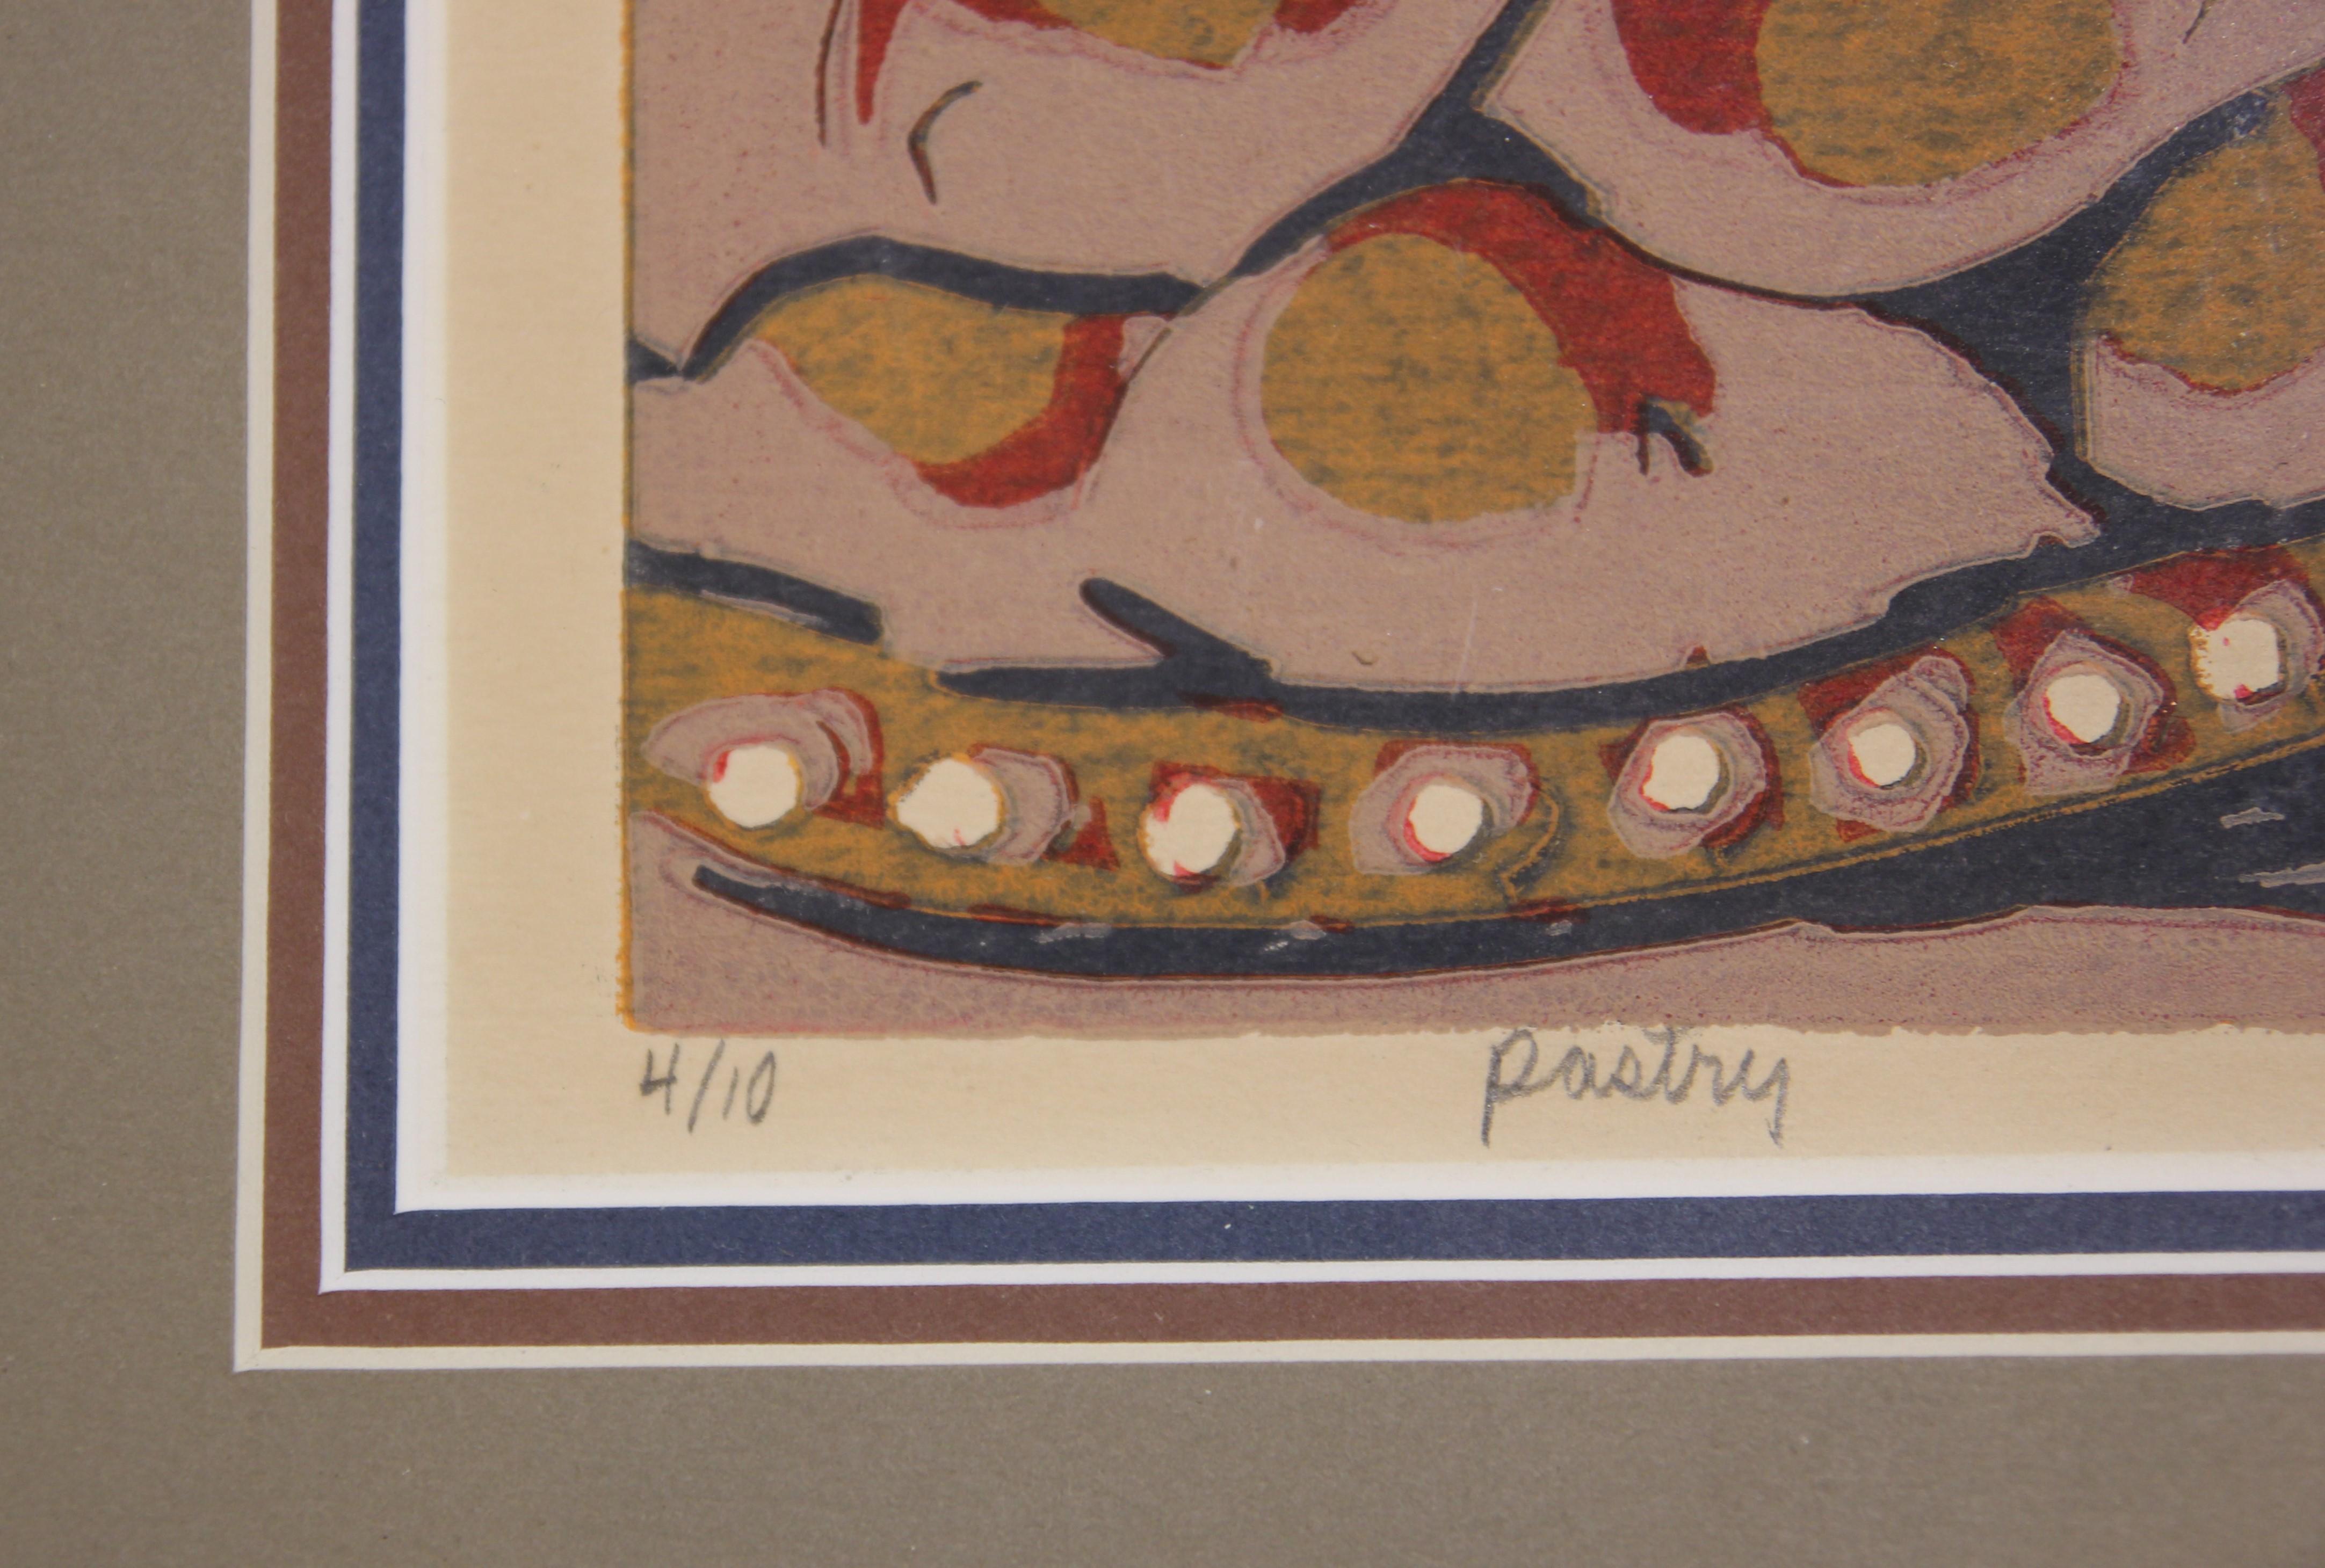 “Pastry” Red, Blue, Yellow, and White Patterned Still Life Woodblock Print - Brown Interior Print by Richard Conn